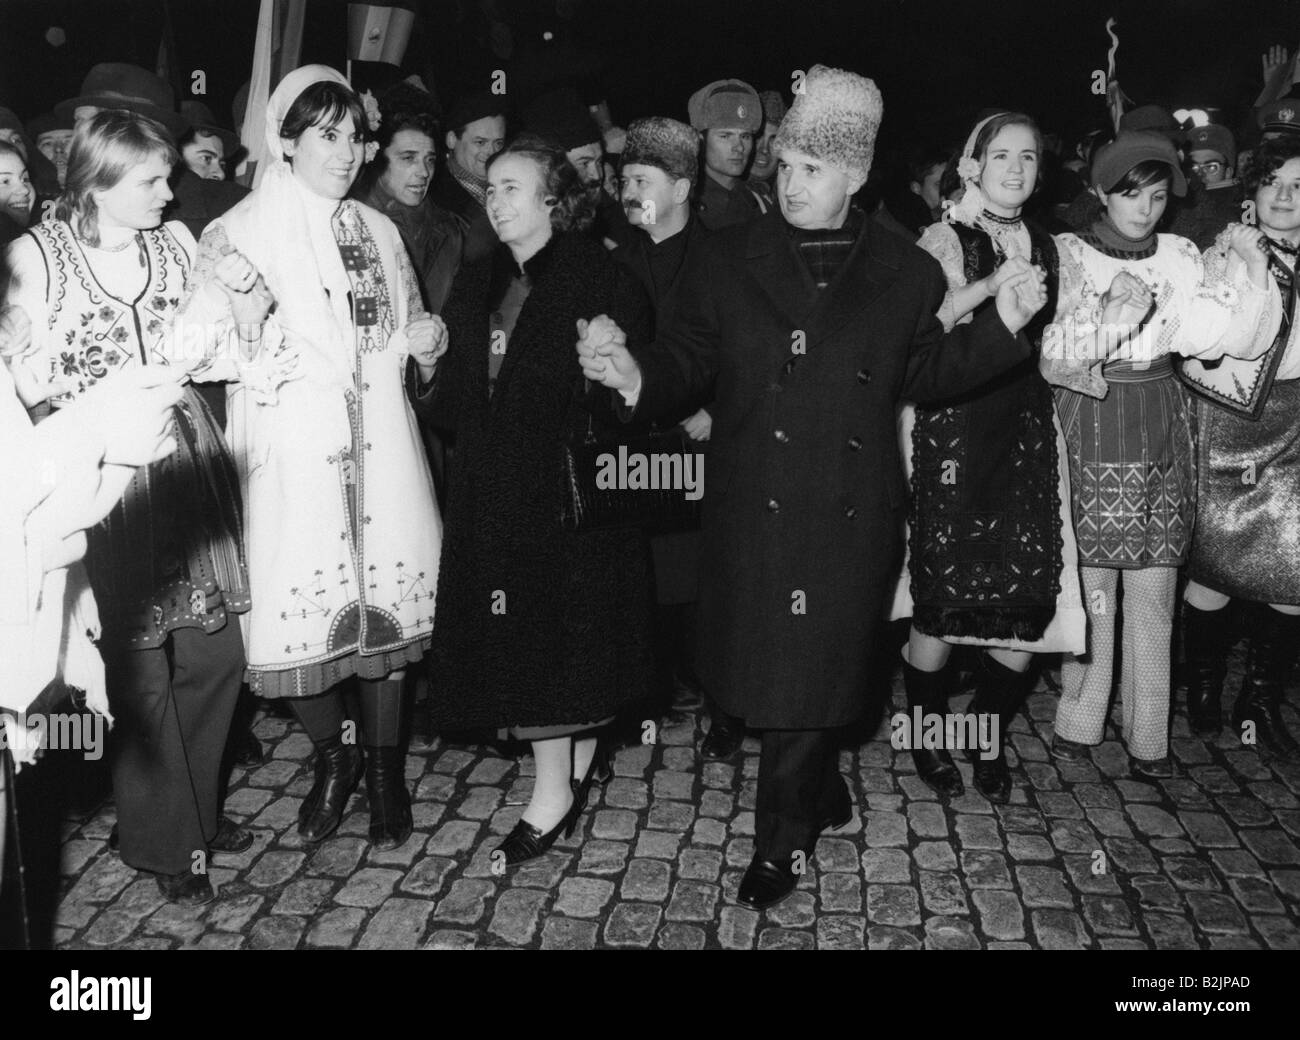 Ceausescu, Nicolae, 26.1.1918 - 25.12.1989, Romanian politician (PCR), President 22.3.1965 - 22.12.1989, with wife Elena and youth in national costume, circa 1970, , Stock Photo